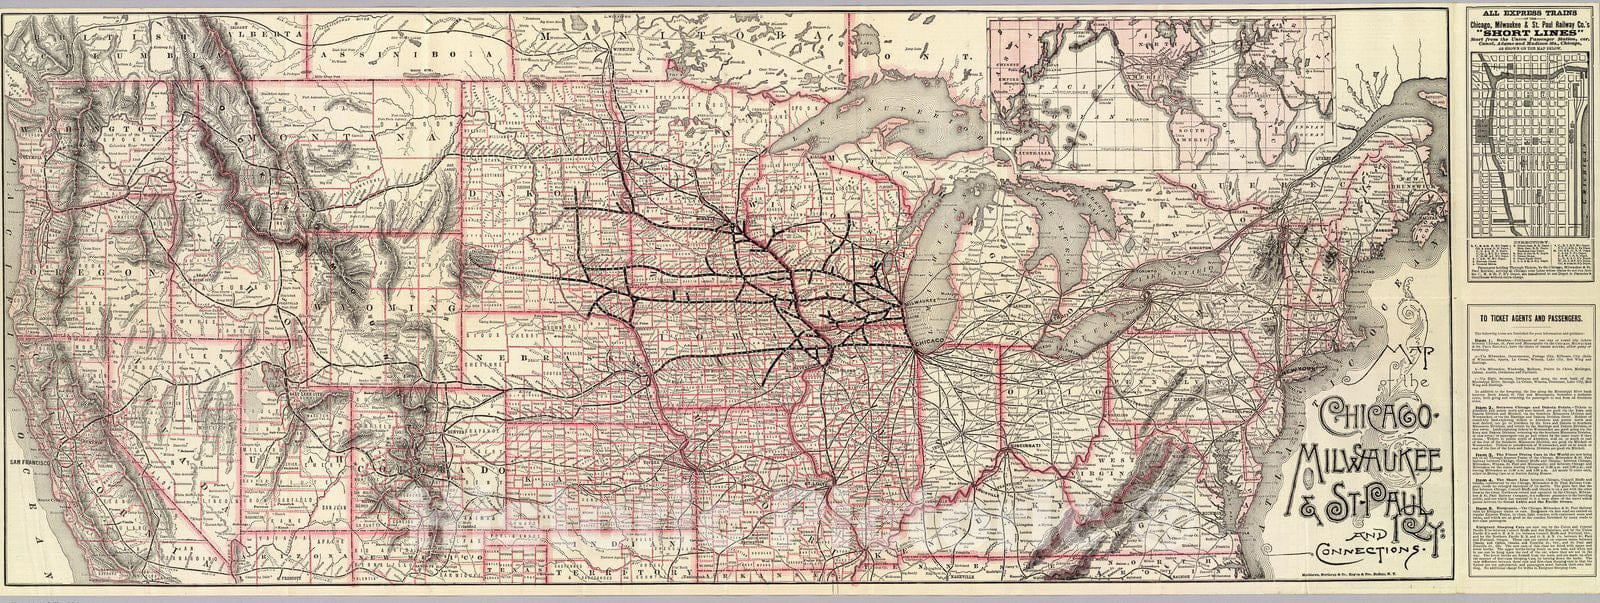 Historic Map : Chicago-Milwaukee & St. Paul Railway and connections., 1885, Vintage Wall Decor